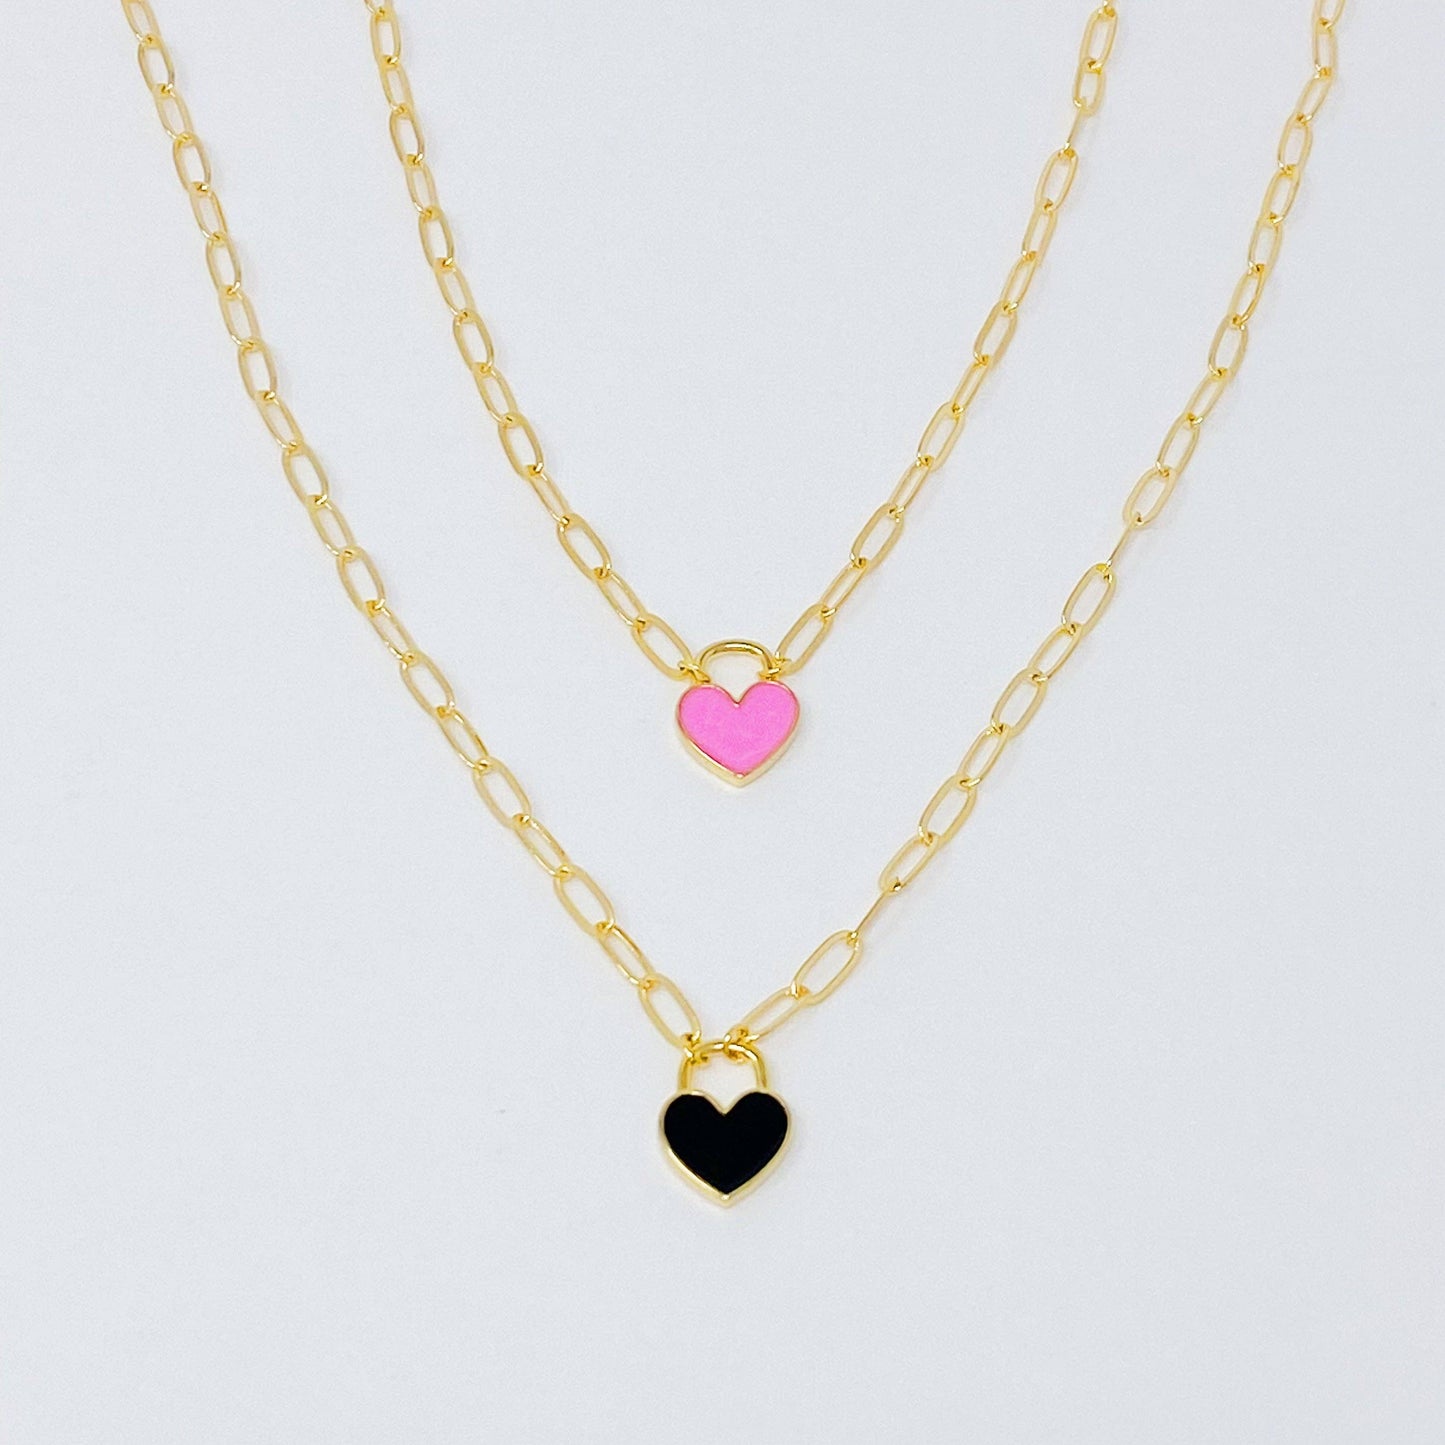 Colored & Locked Heart Necklace: White